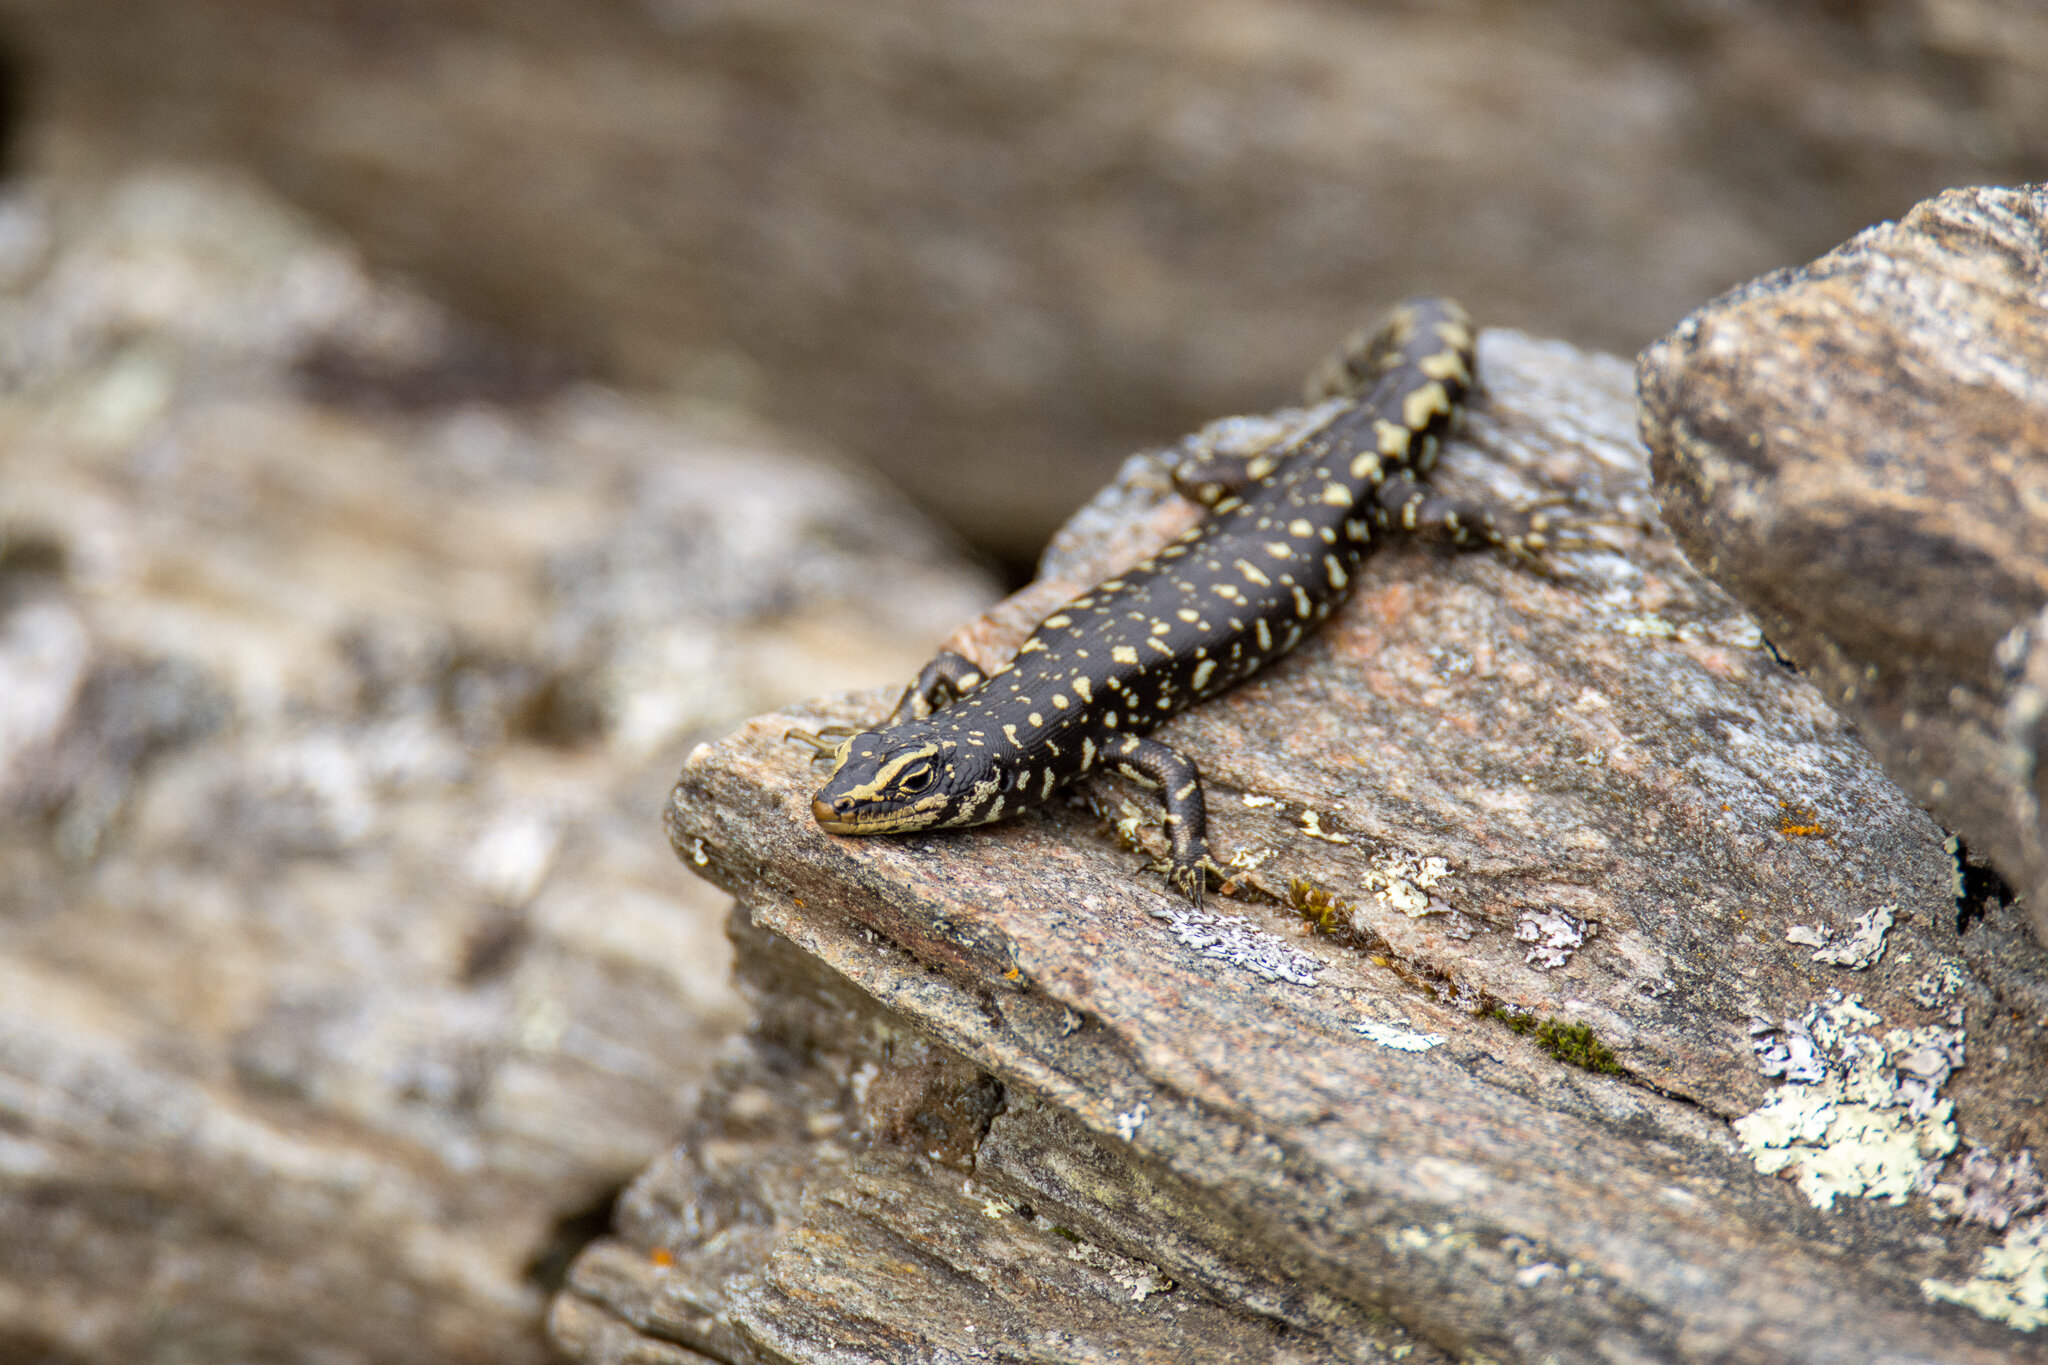 otago skink_photo cred Giverny Forbes.jpg